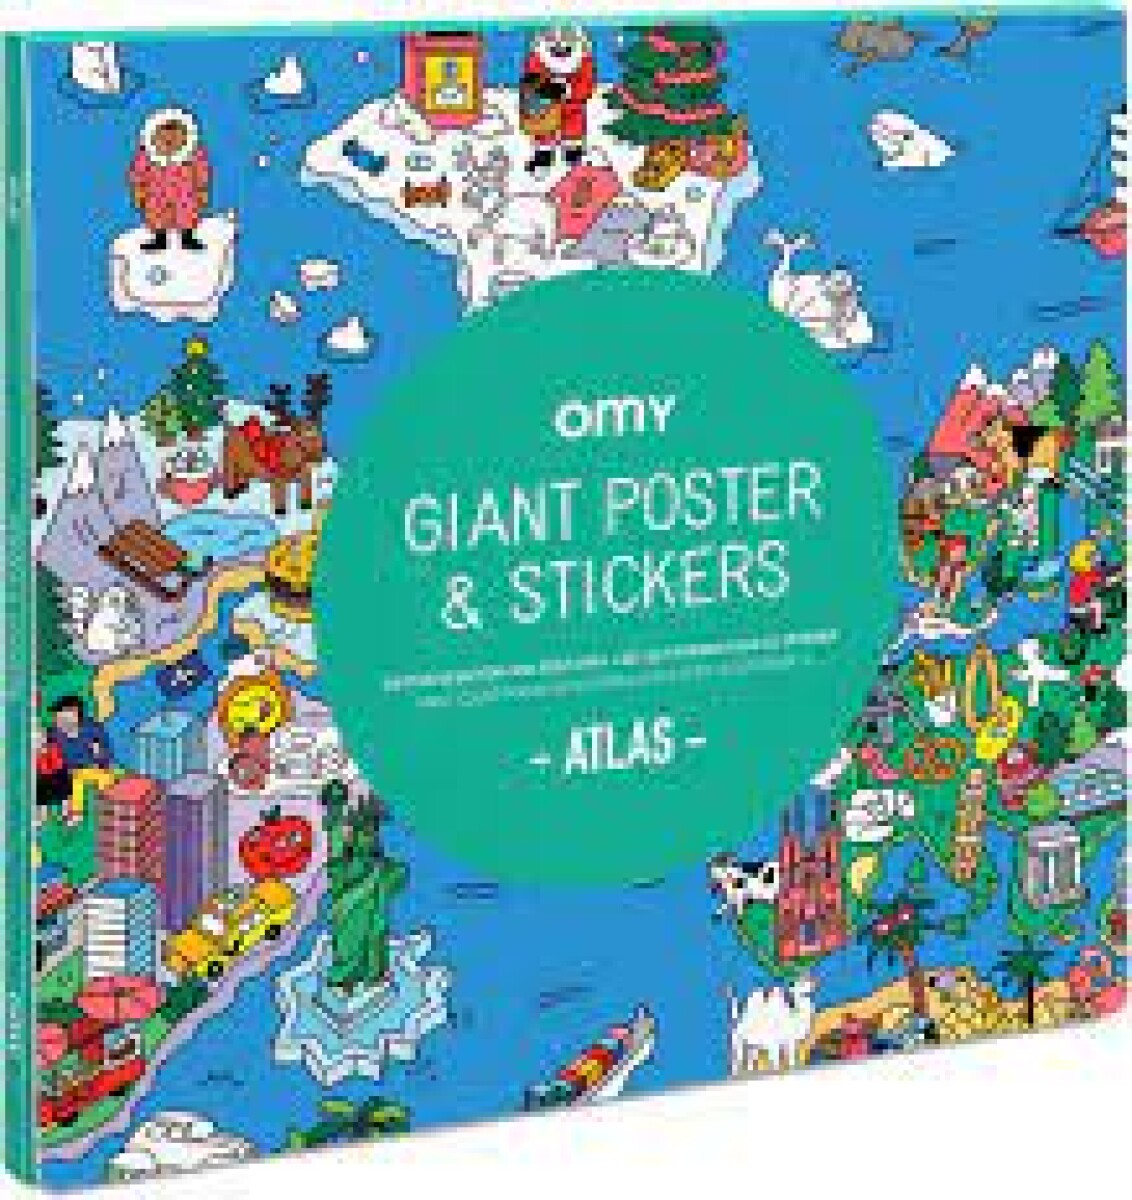 OMY GIANT POSTER & STICKERS 